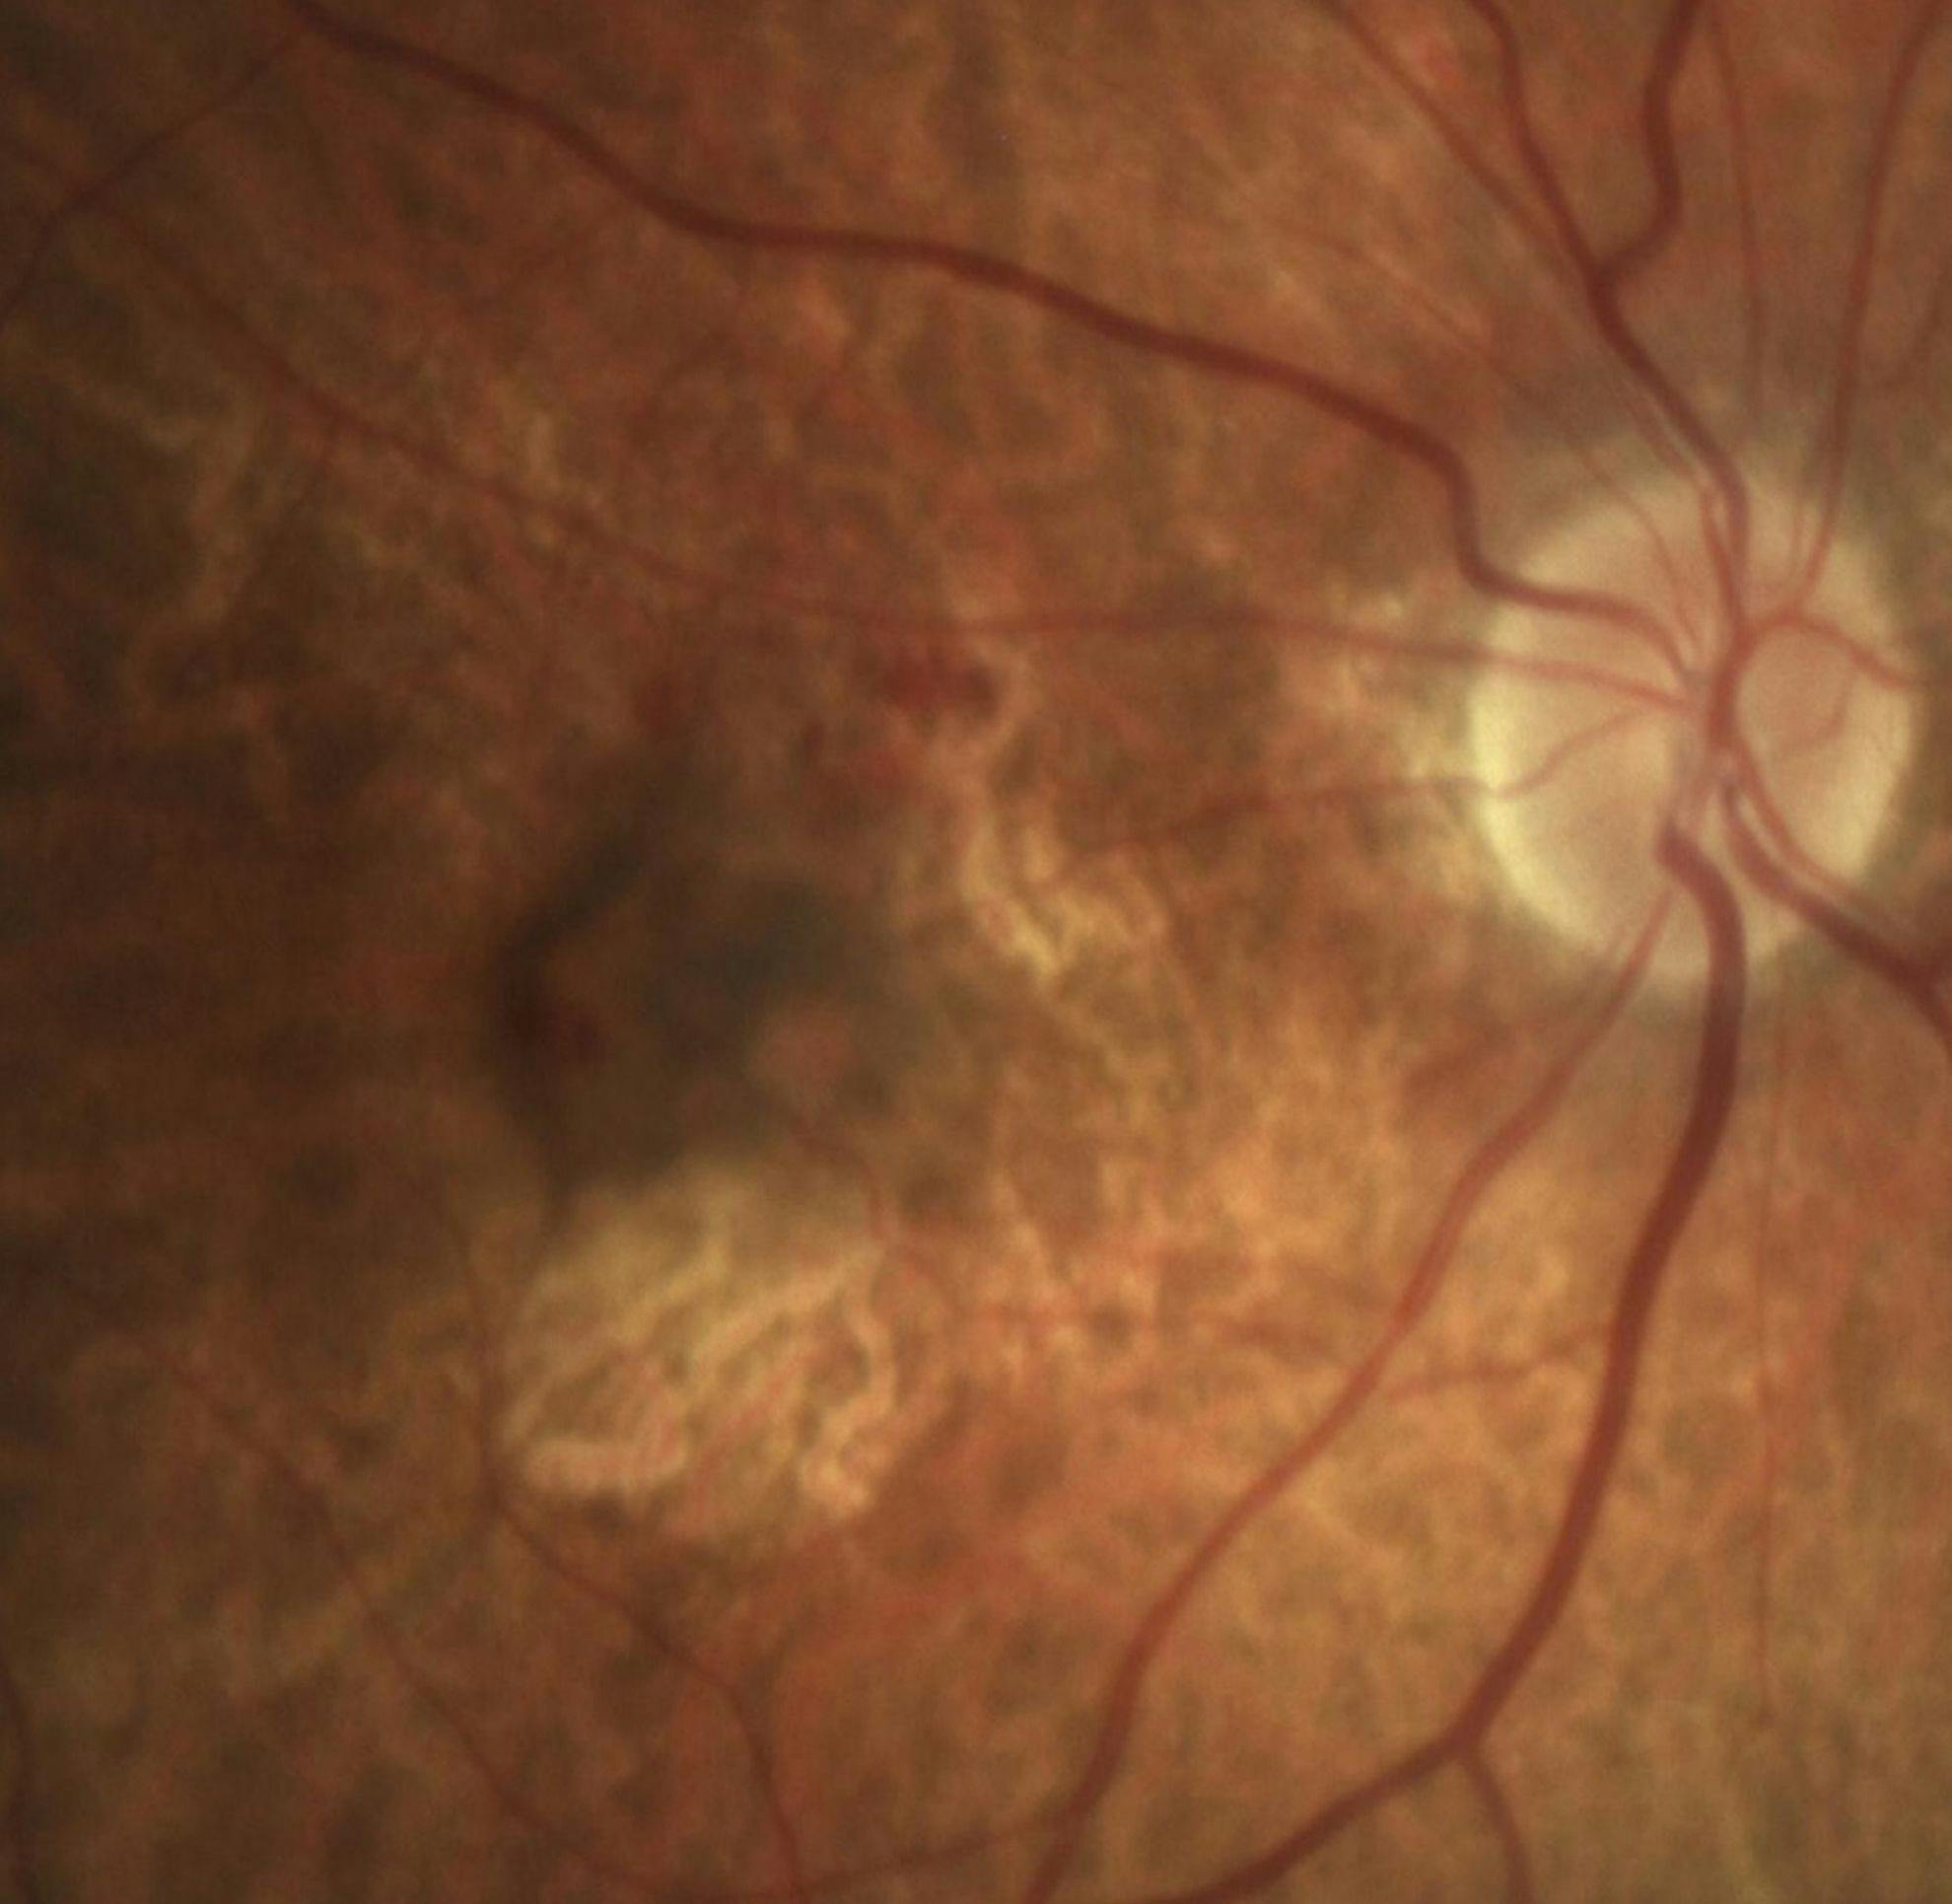 Color fundus photograph. (Image courtesy of M. Rafieetary, OD.)